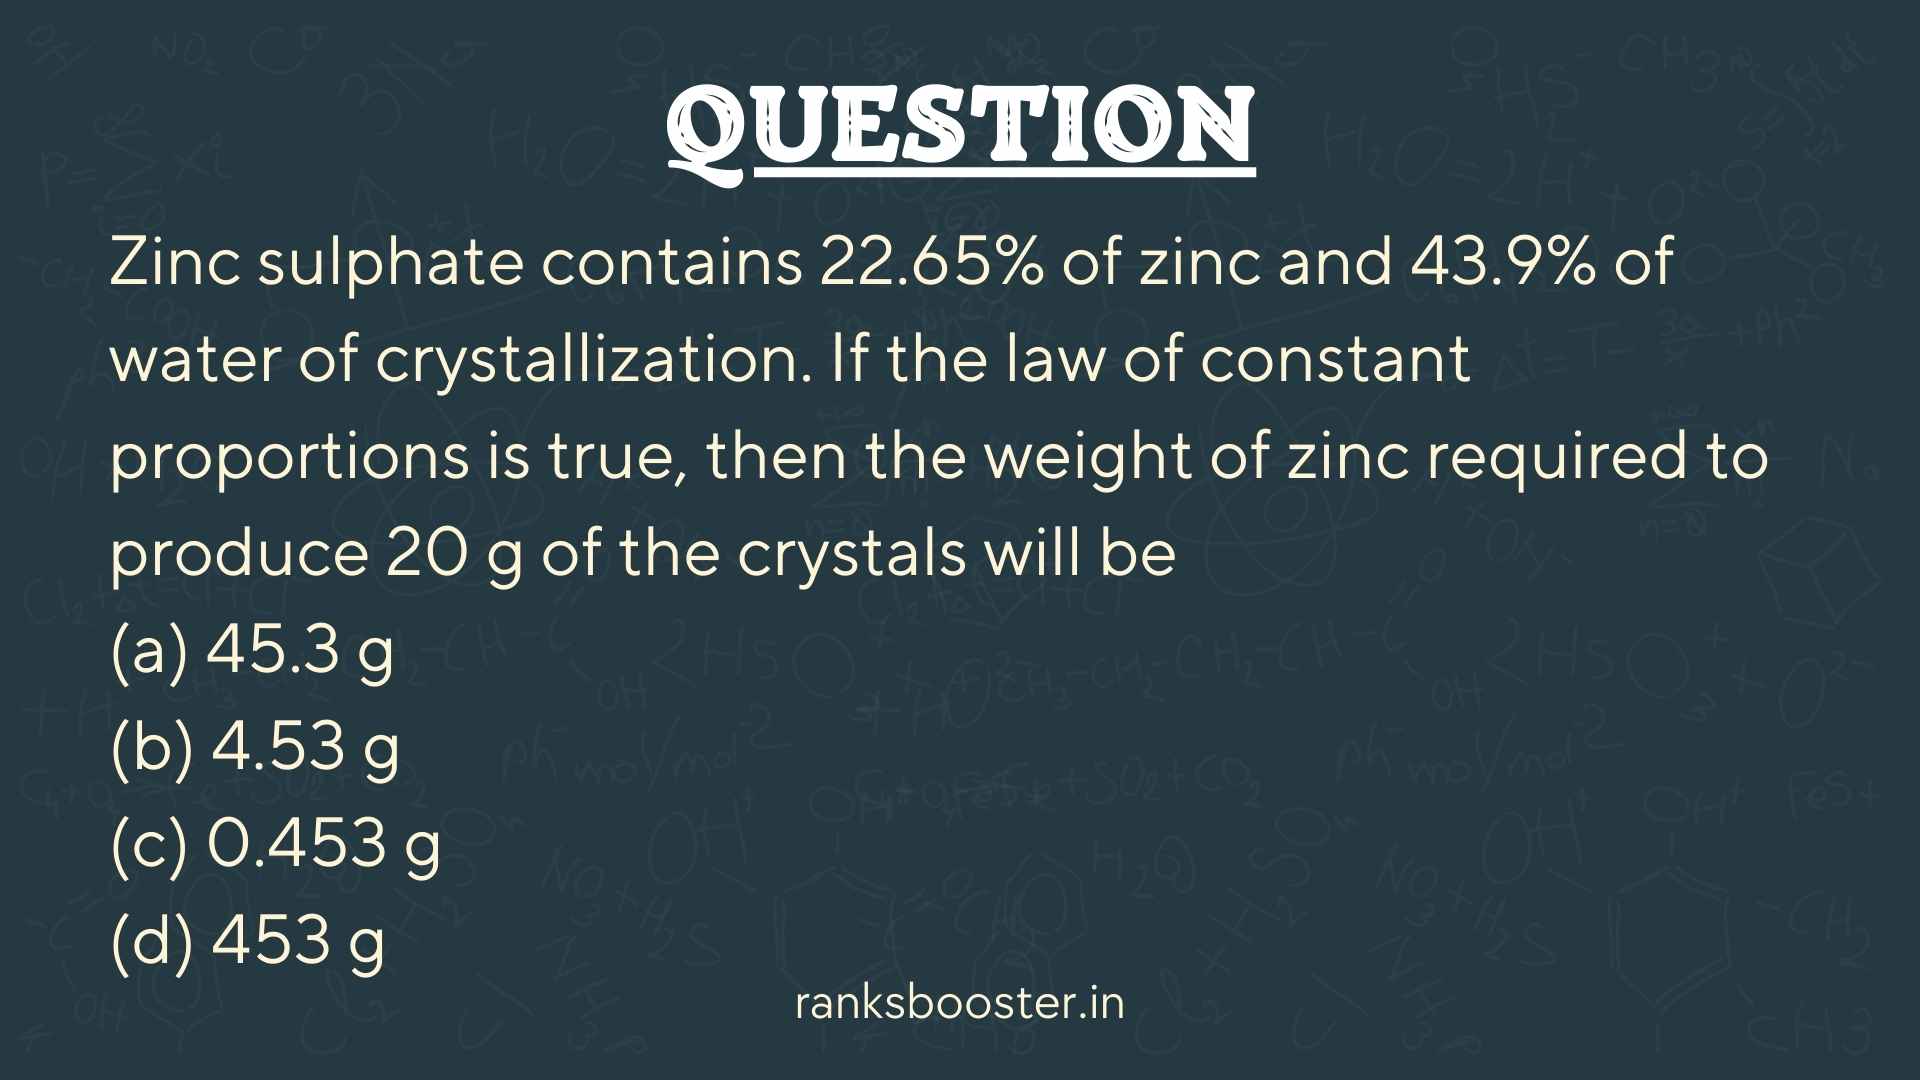 Question: Zinc sulphate contains 22.65% of zinc and 43.9% of water of crystallization. If the law of constant proportions is true, then the weight of zinc required to produce 20 g of the crystals will be (a) 45.3 g (b) 4.53 g (c) 0.453 g (d) 453 g